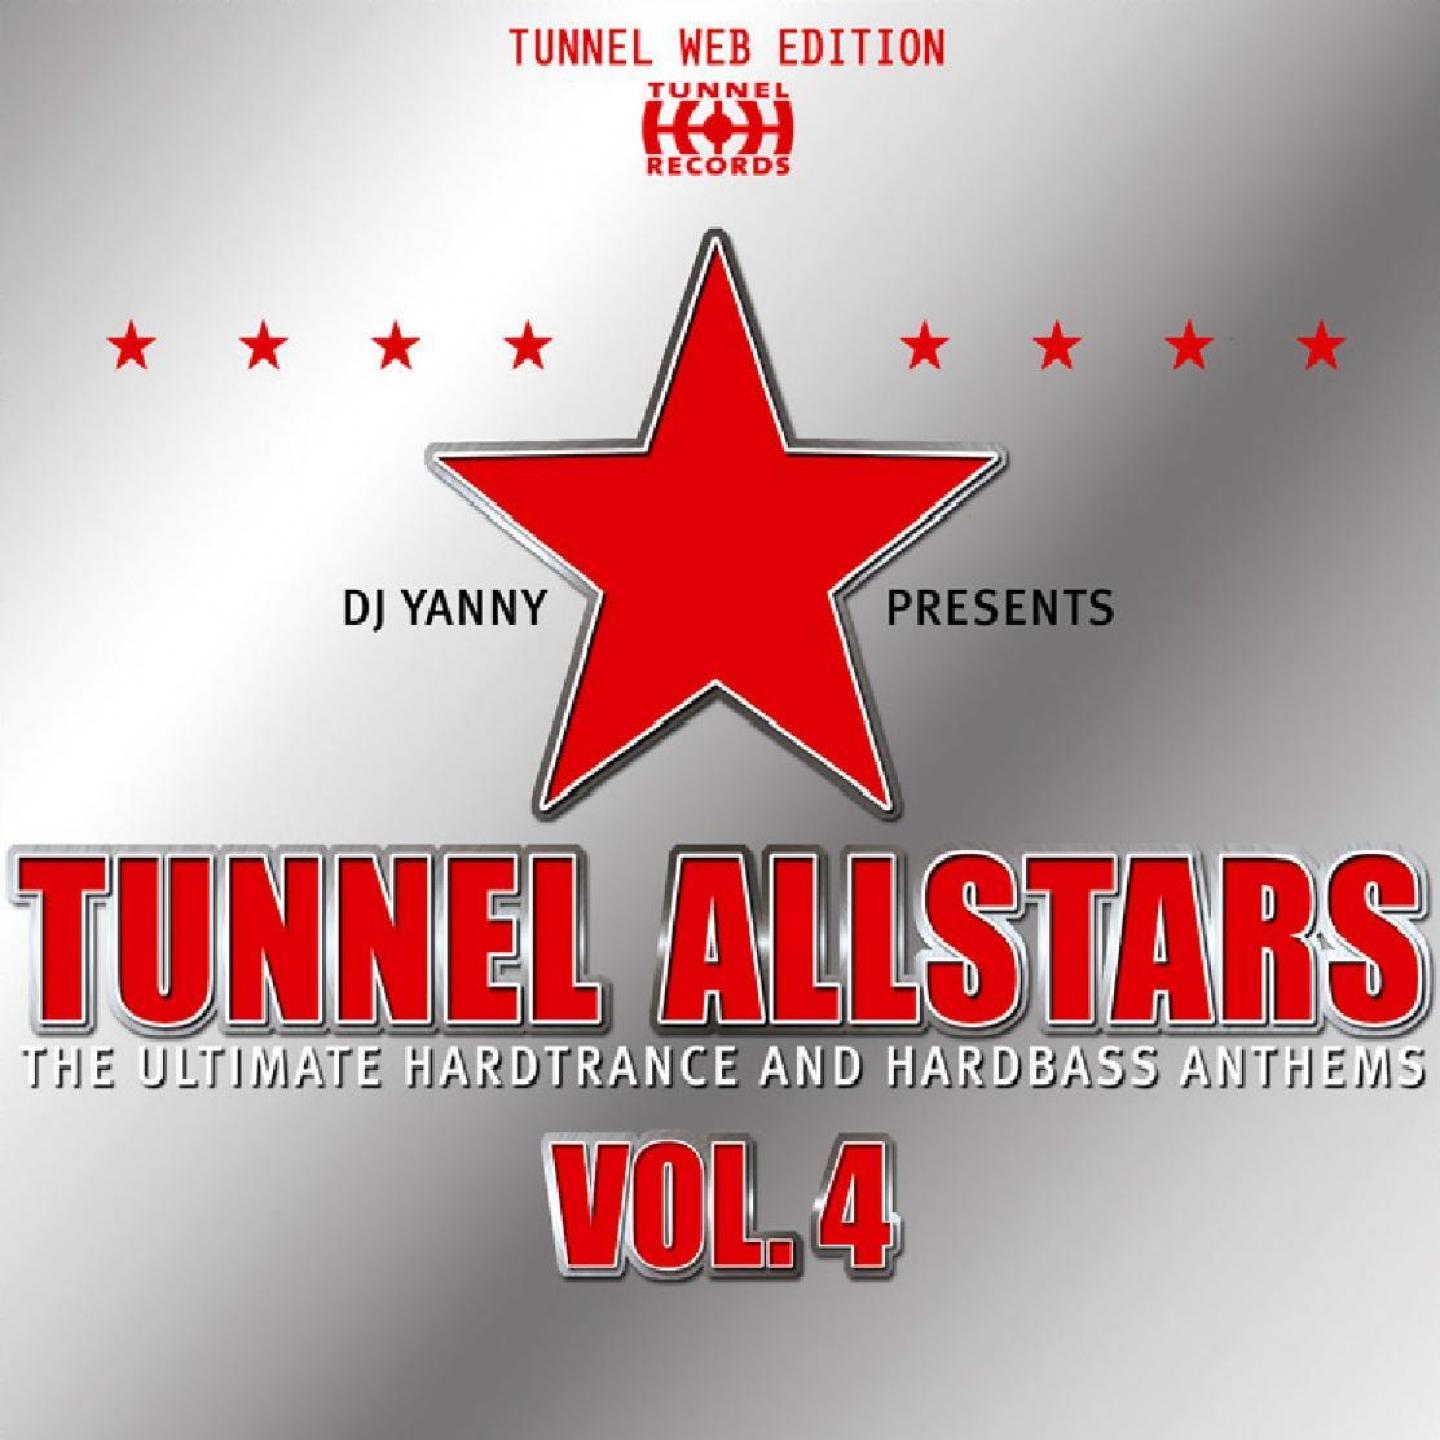 Tunnel Allstars Vol.4 (The Ultimate Hardtrance and Hardbass Anthems)